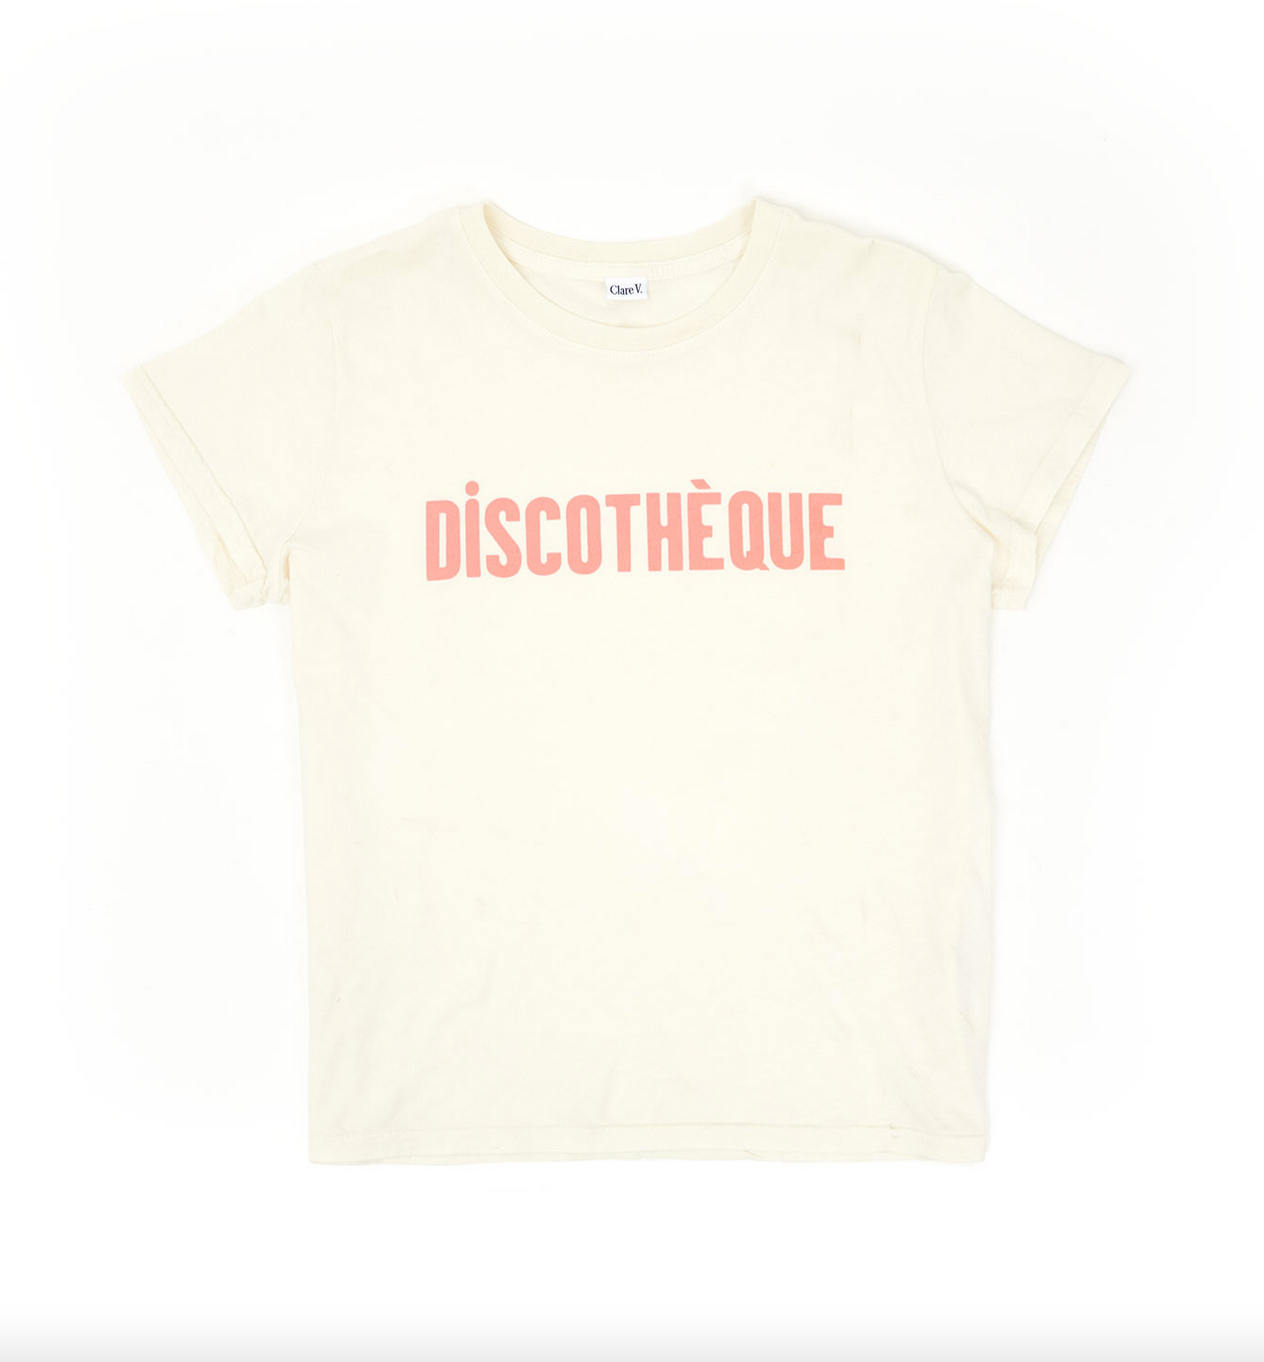 Discoteque classic tee in cream with dusty pink.